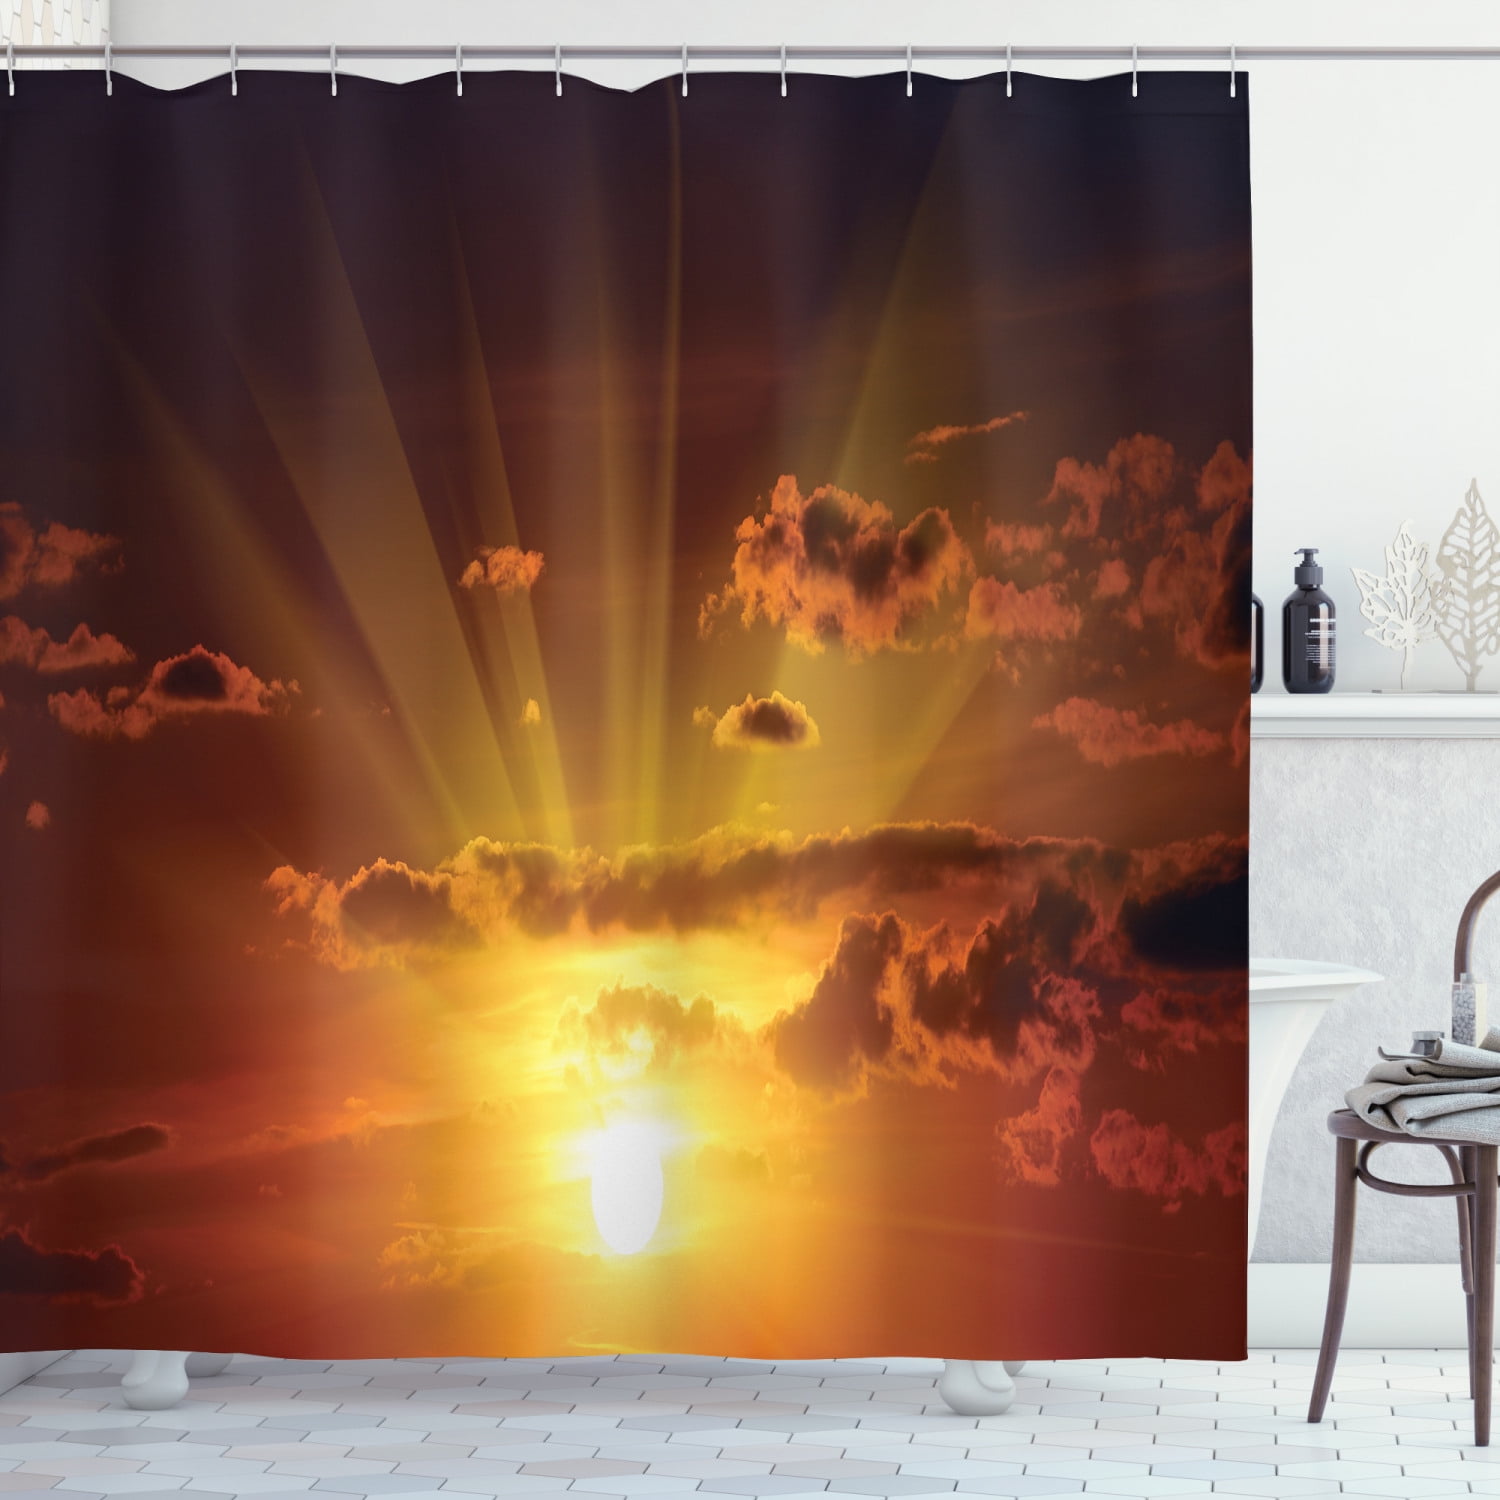 Details about   Brown Light Nice Pug 3D Shower Curtain Waterproof Fabric Bathroom Decoration 